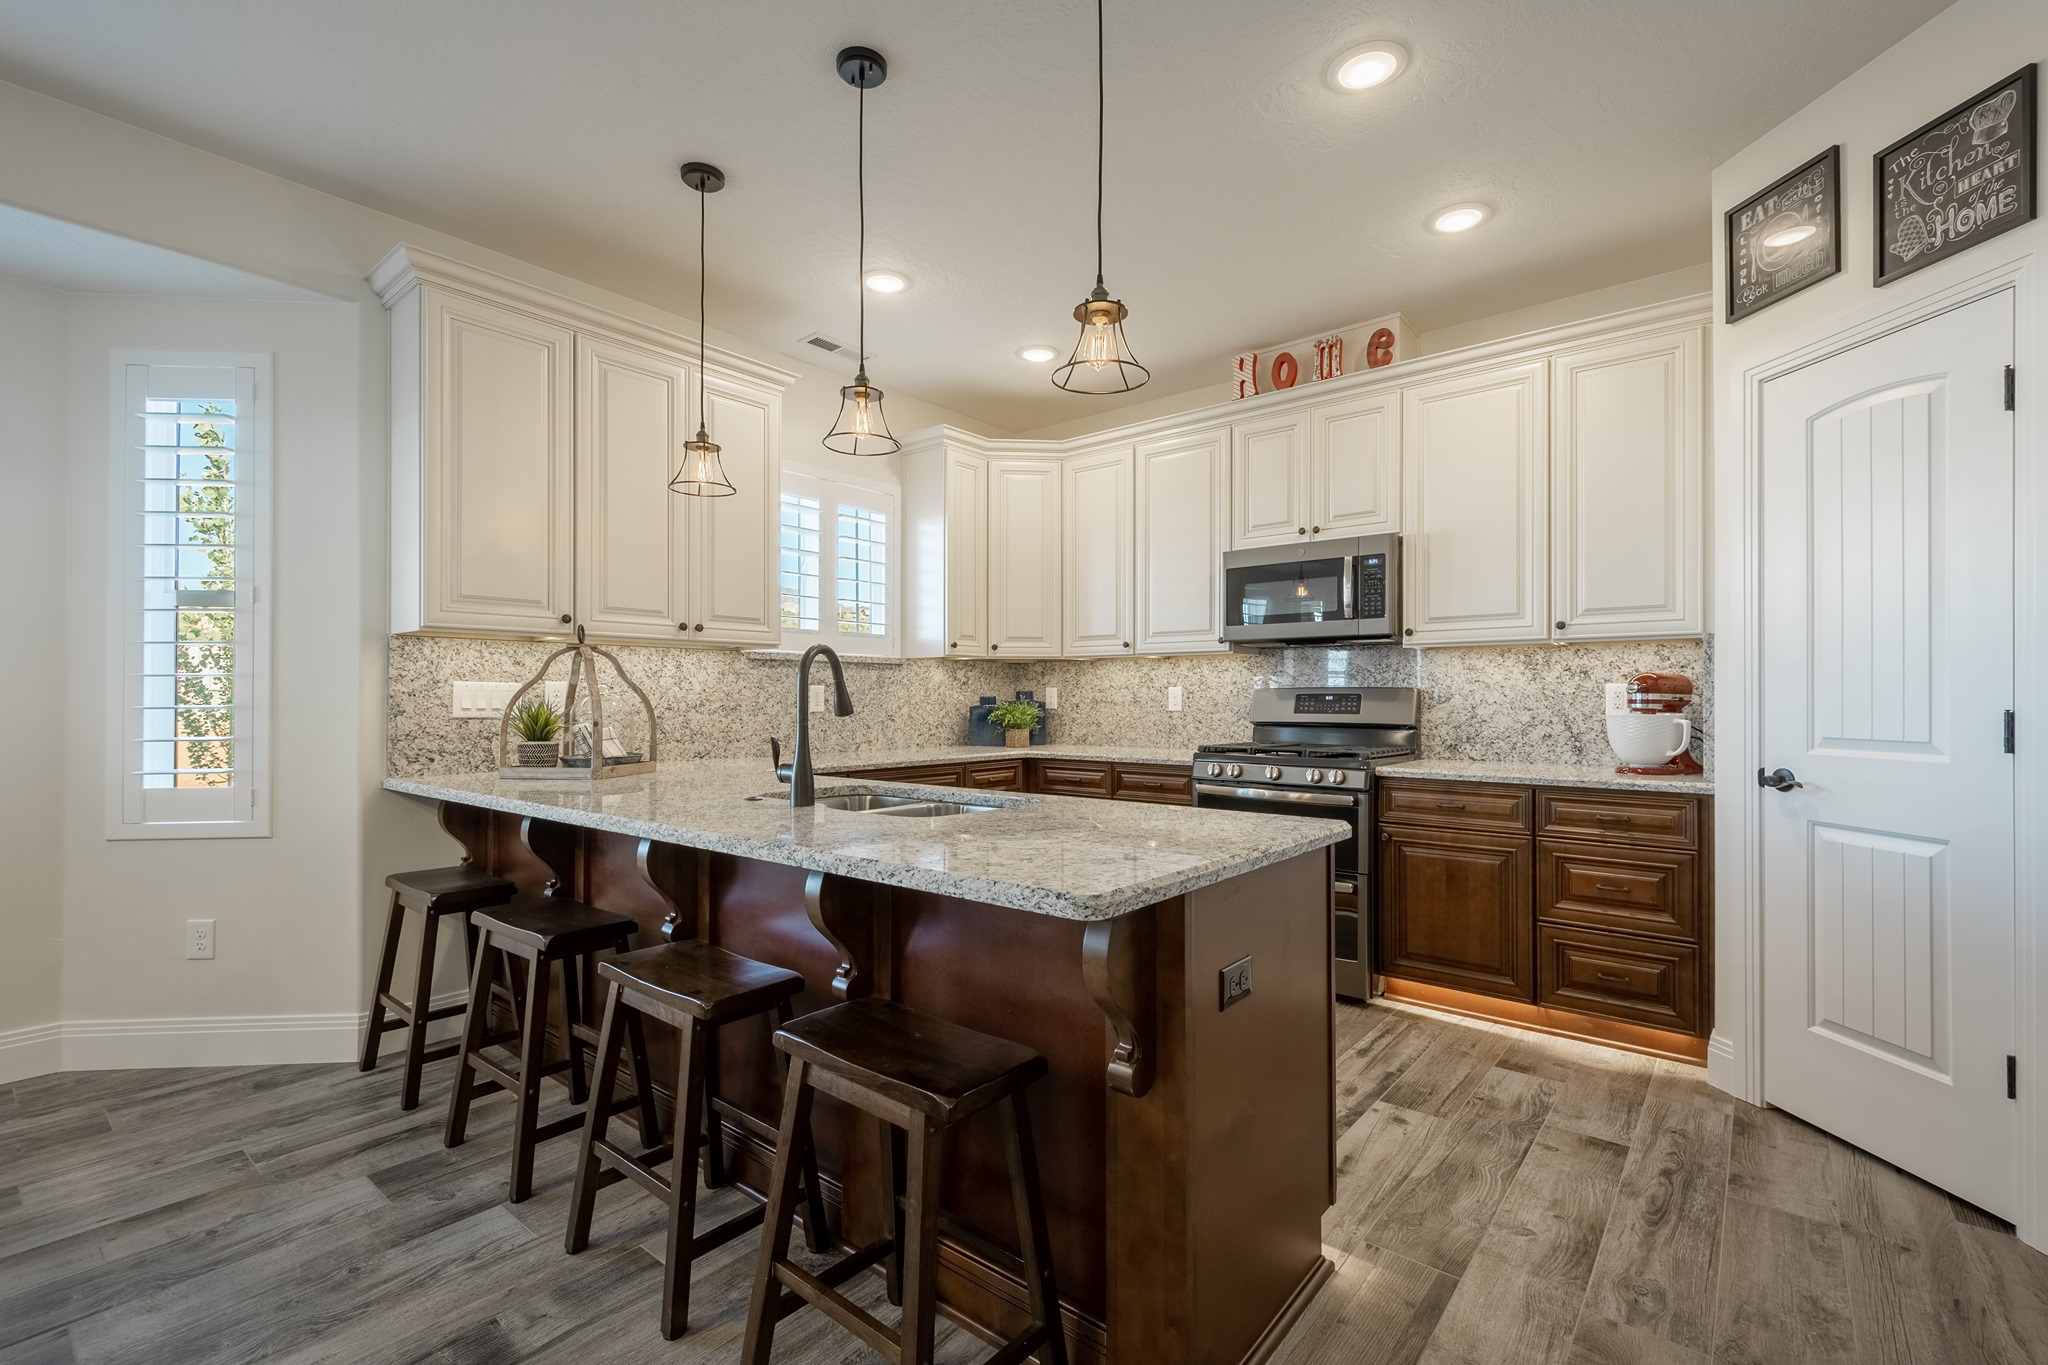 Cabinetry - Cabinets & Appliances for Builders in St George Utah